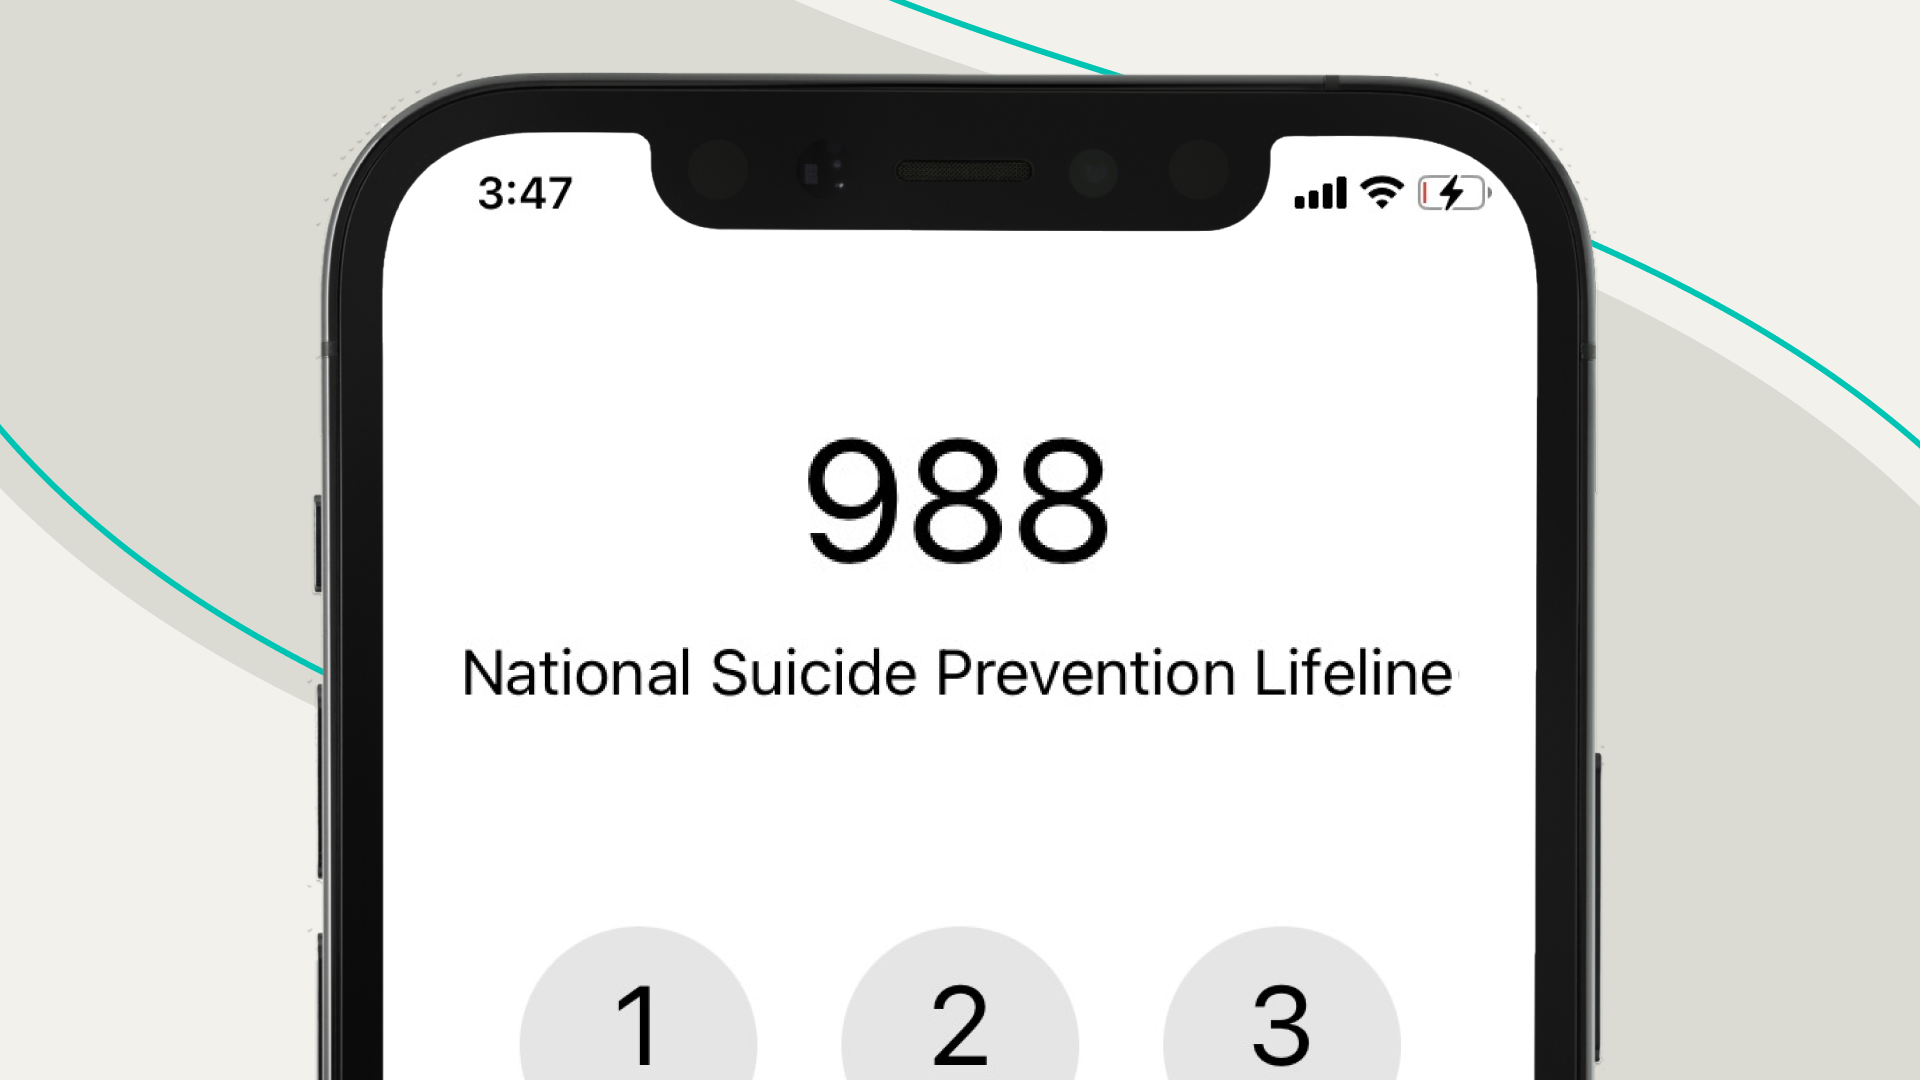 A phone screen shows the new number for the National Suicide Prevention Lifeline, 988.